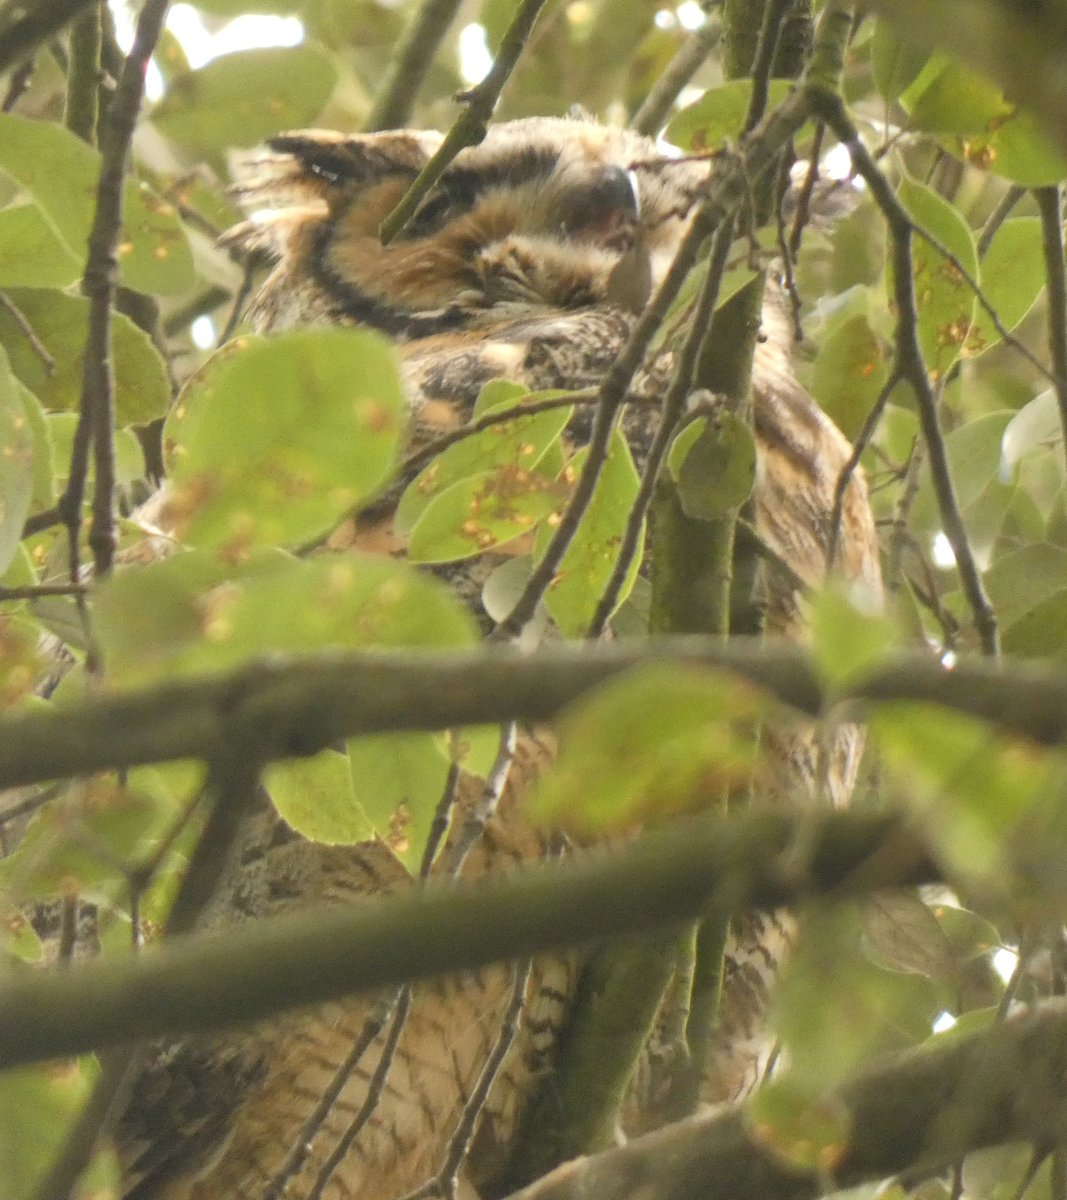 Eagle Owl at Russia Dock Woodland this afternoon, appears to be Bengal (AKA Indian or Rock) #eagleowl #londonbirds